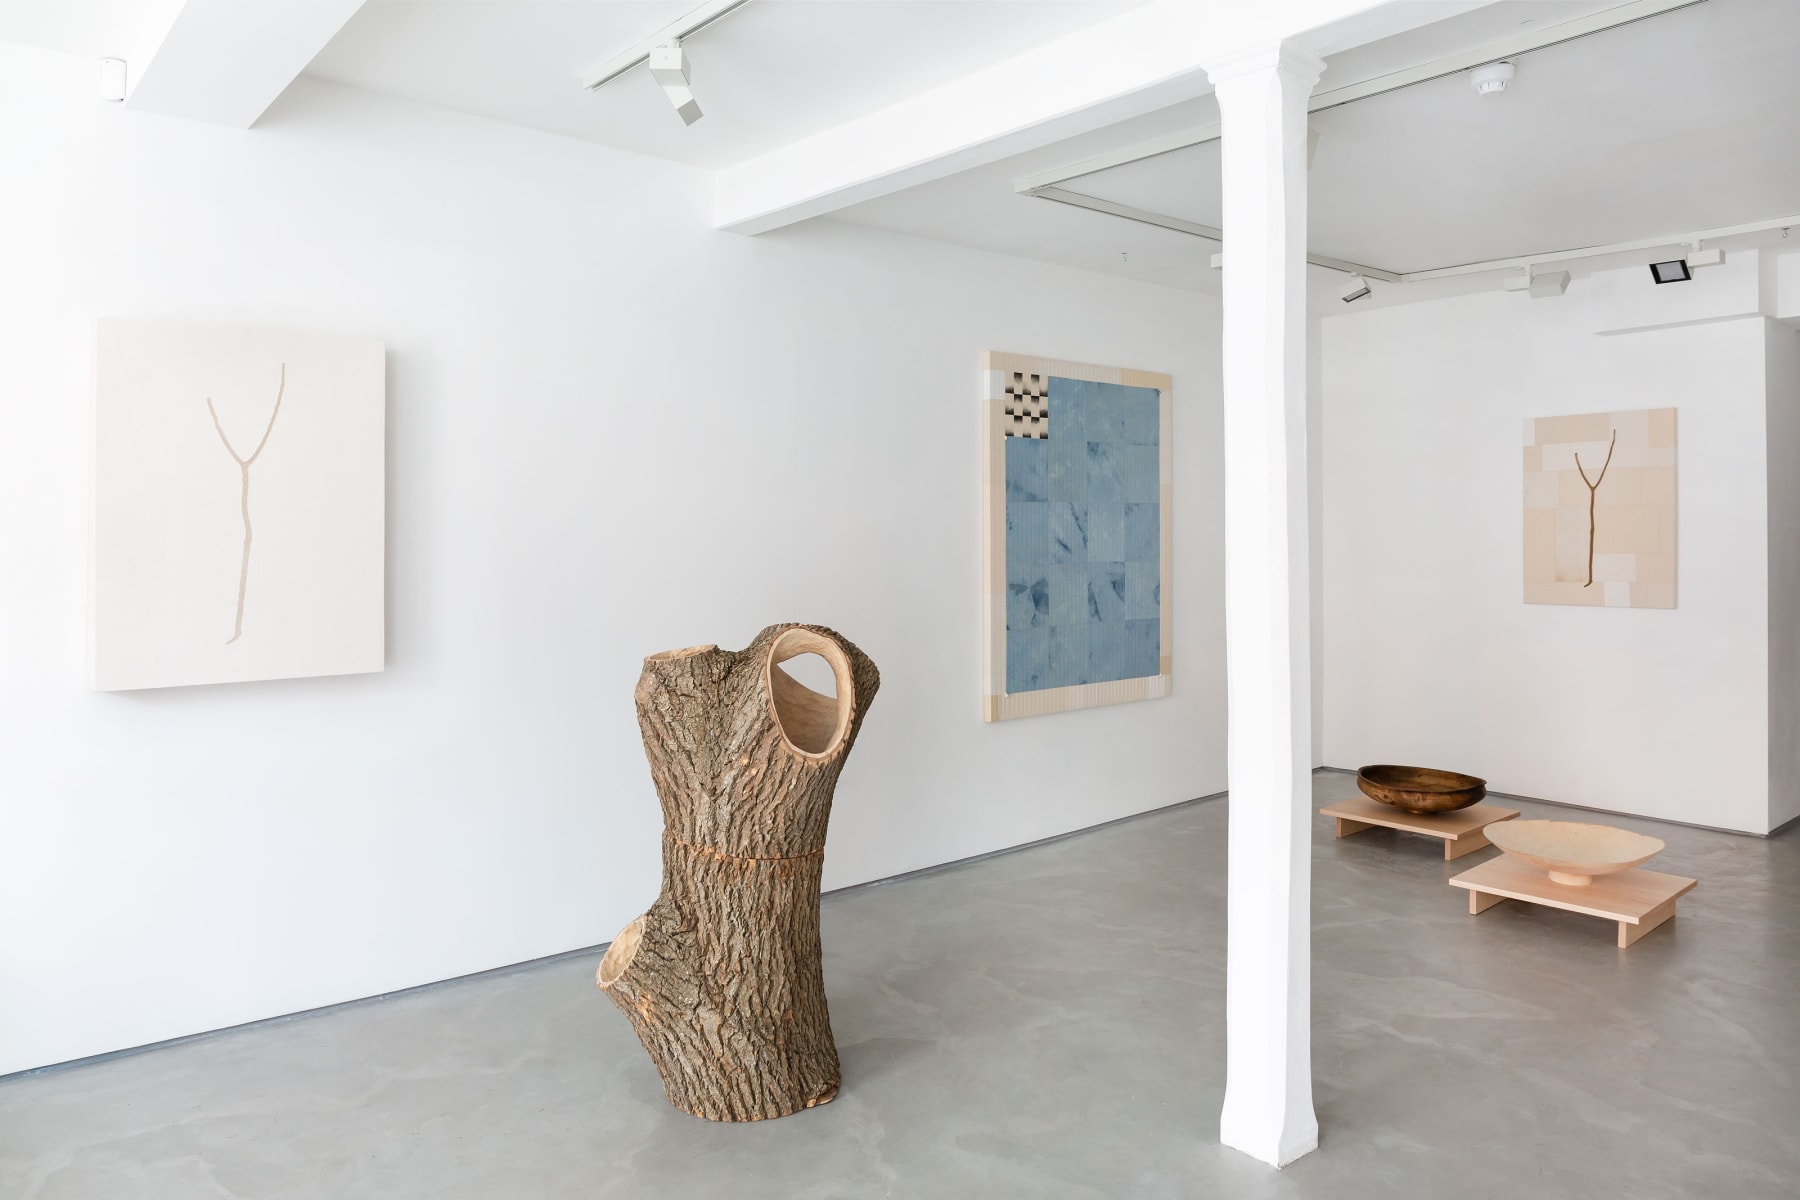 Forest and Found, Shallow Lands, Informality Gallery, Installation view 2021. Image Copyright of the artists.